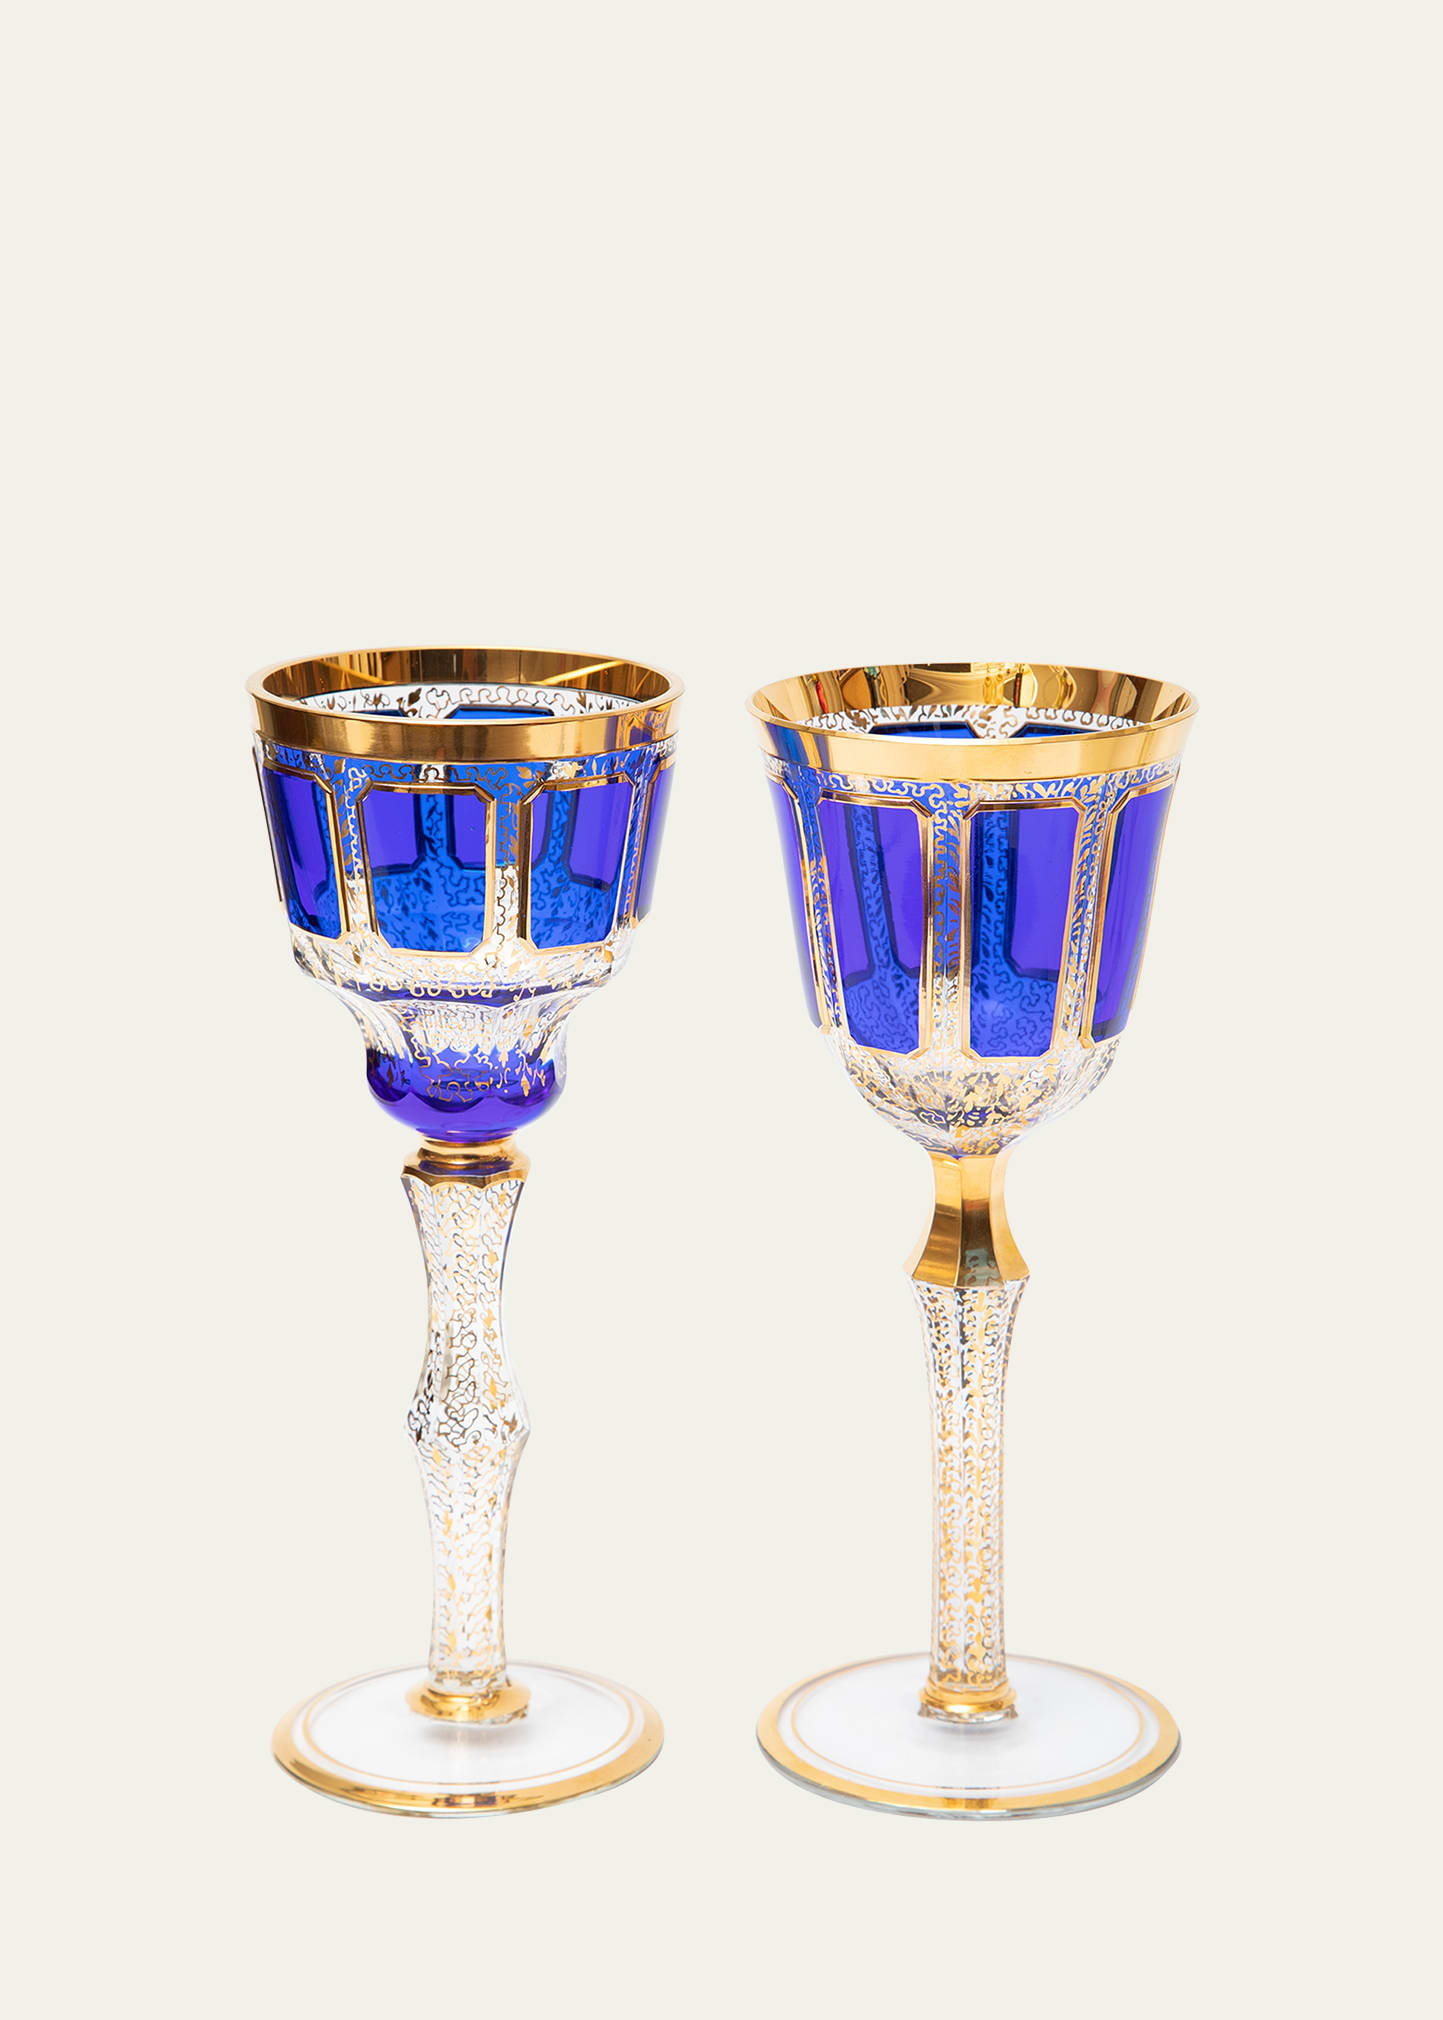 Devonia Antiques 19th-Century Gilded Goblets, Set of 16